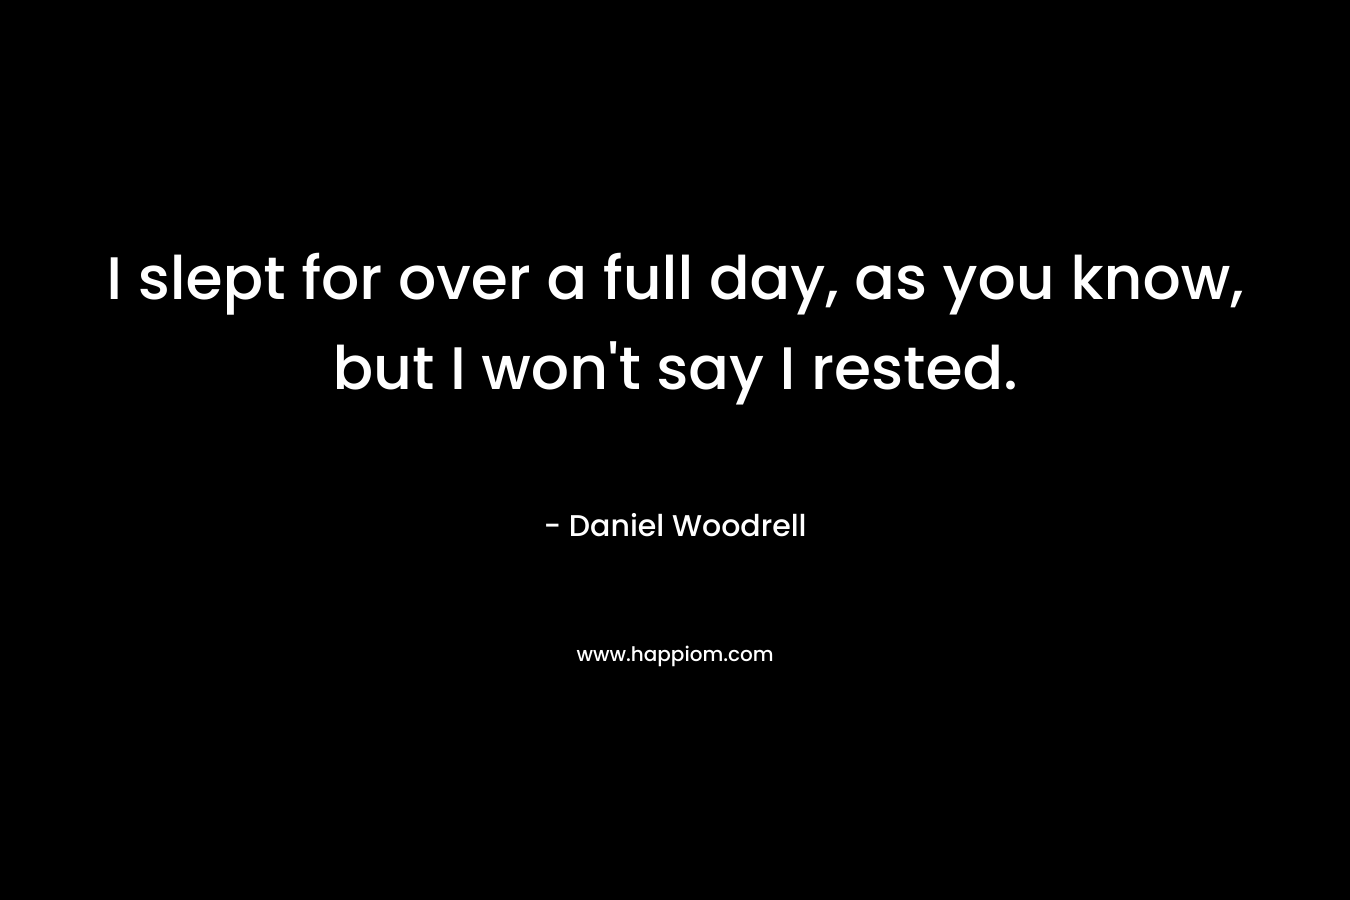 I slept for over a full day, as you know, but I won’t say I rested. – Daniel Woodrell